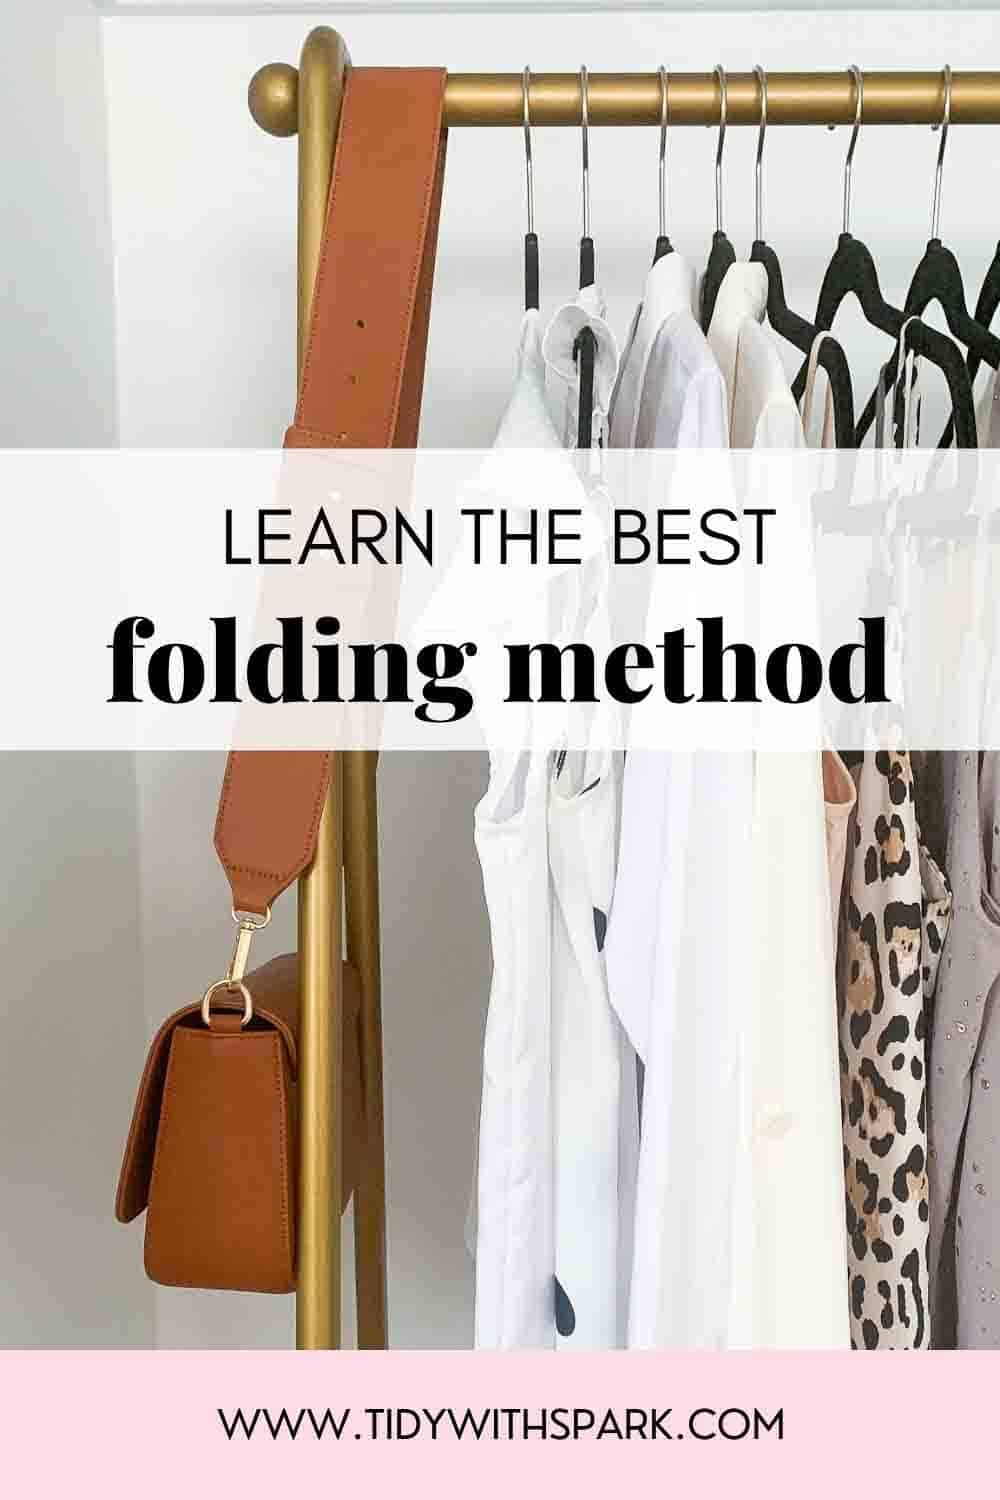 Promotional image for Folding clothes to save space post for tidy with spark blog